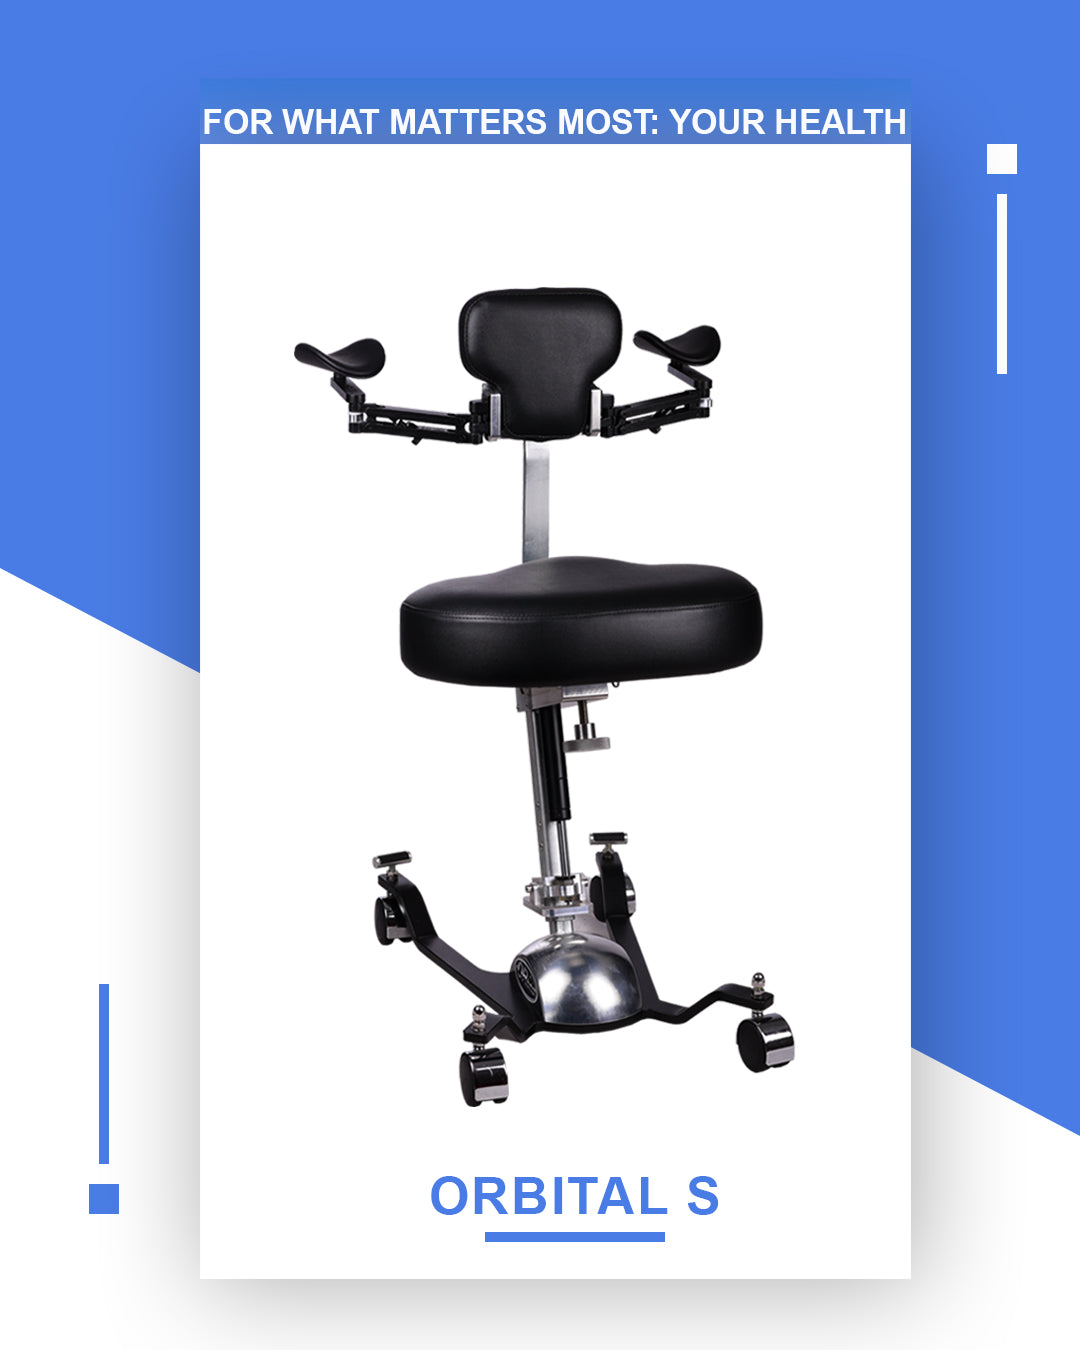 The Orbital S (Surgical)